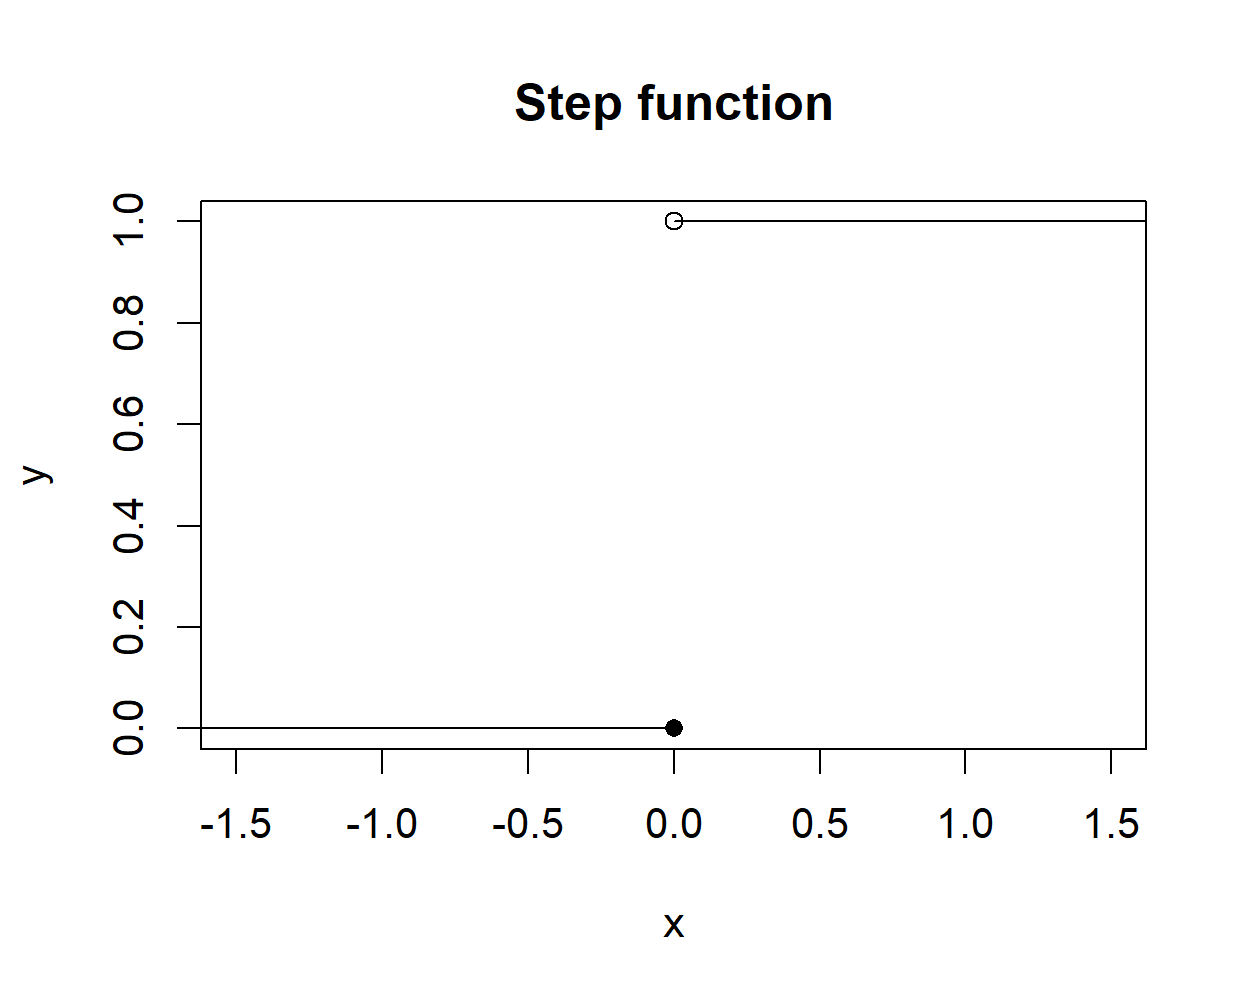 The step function.